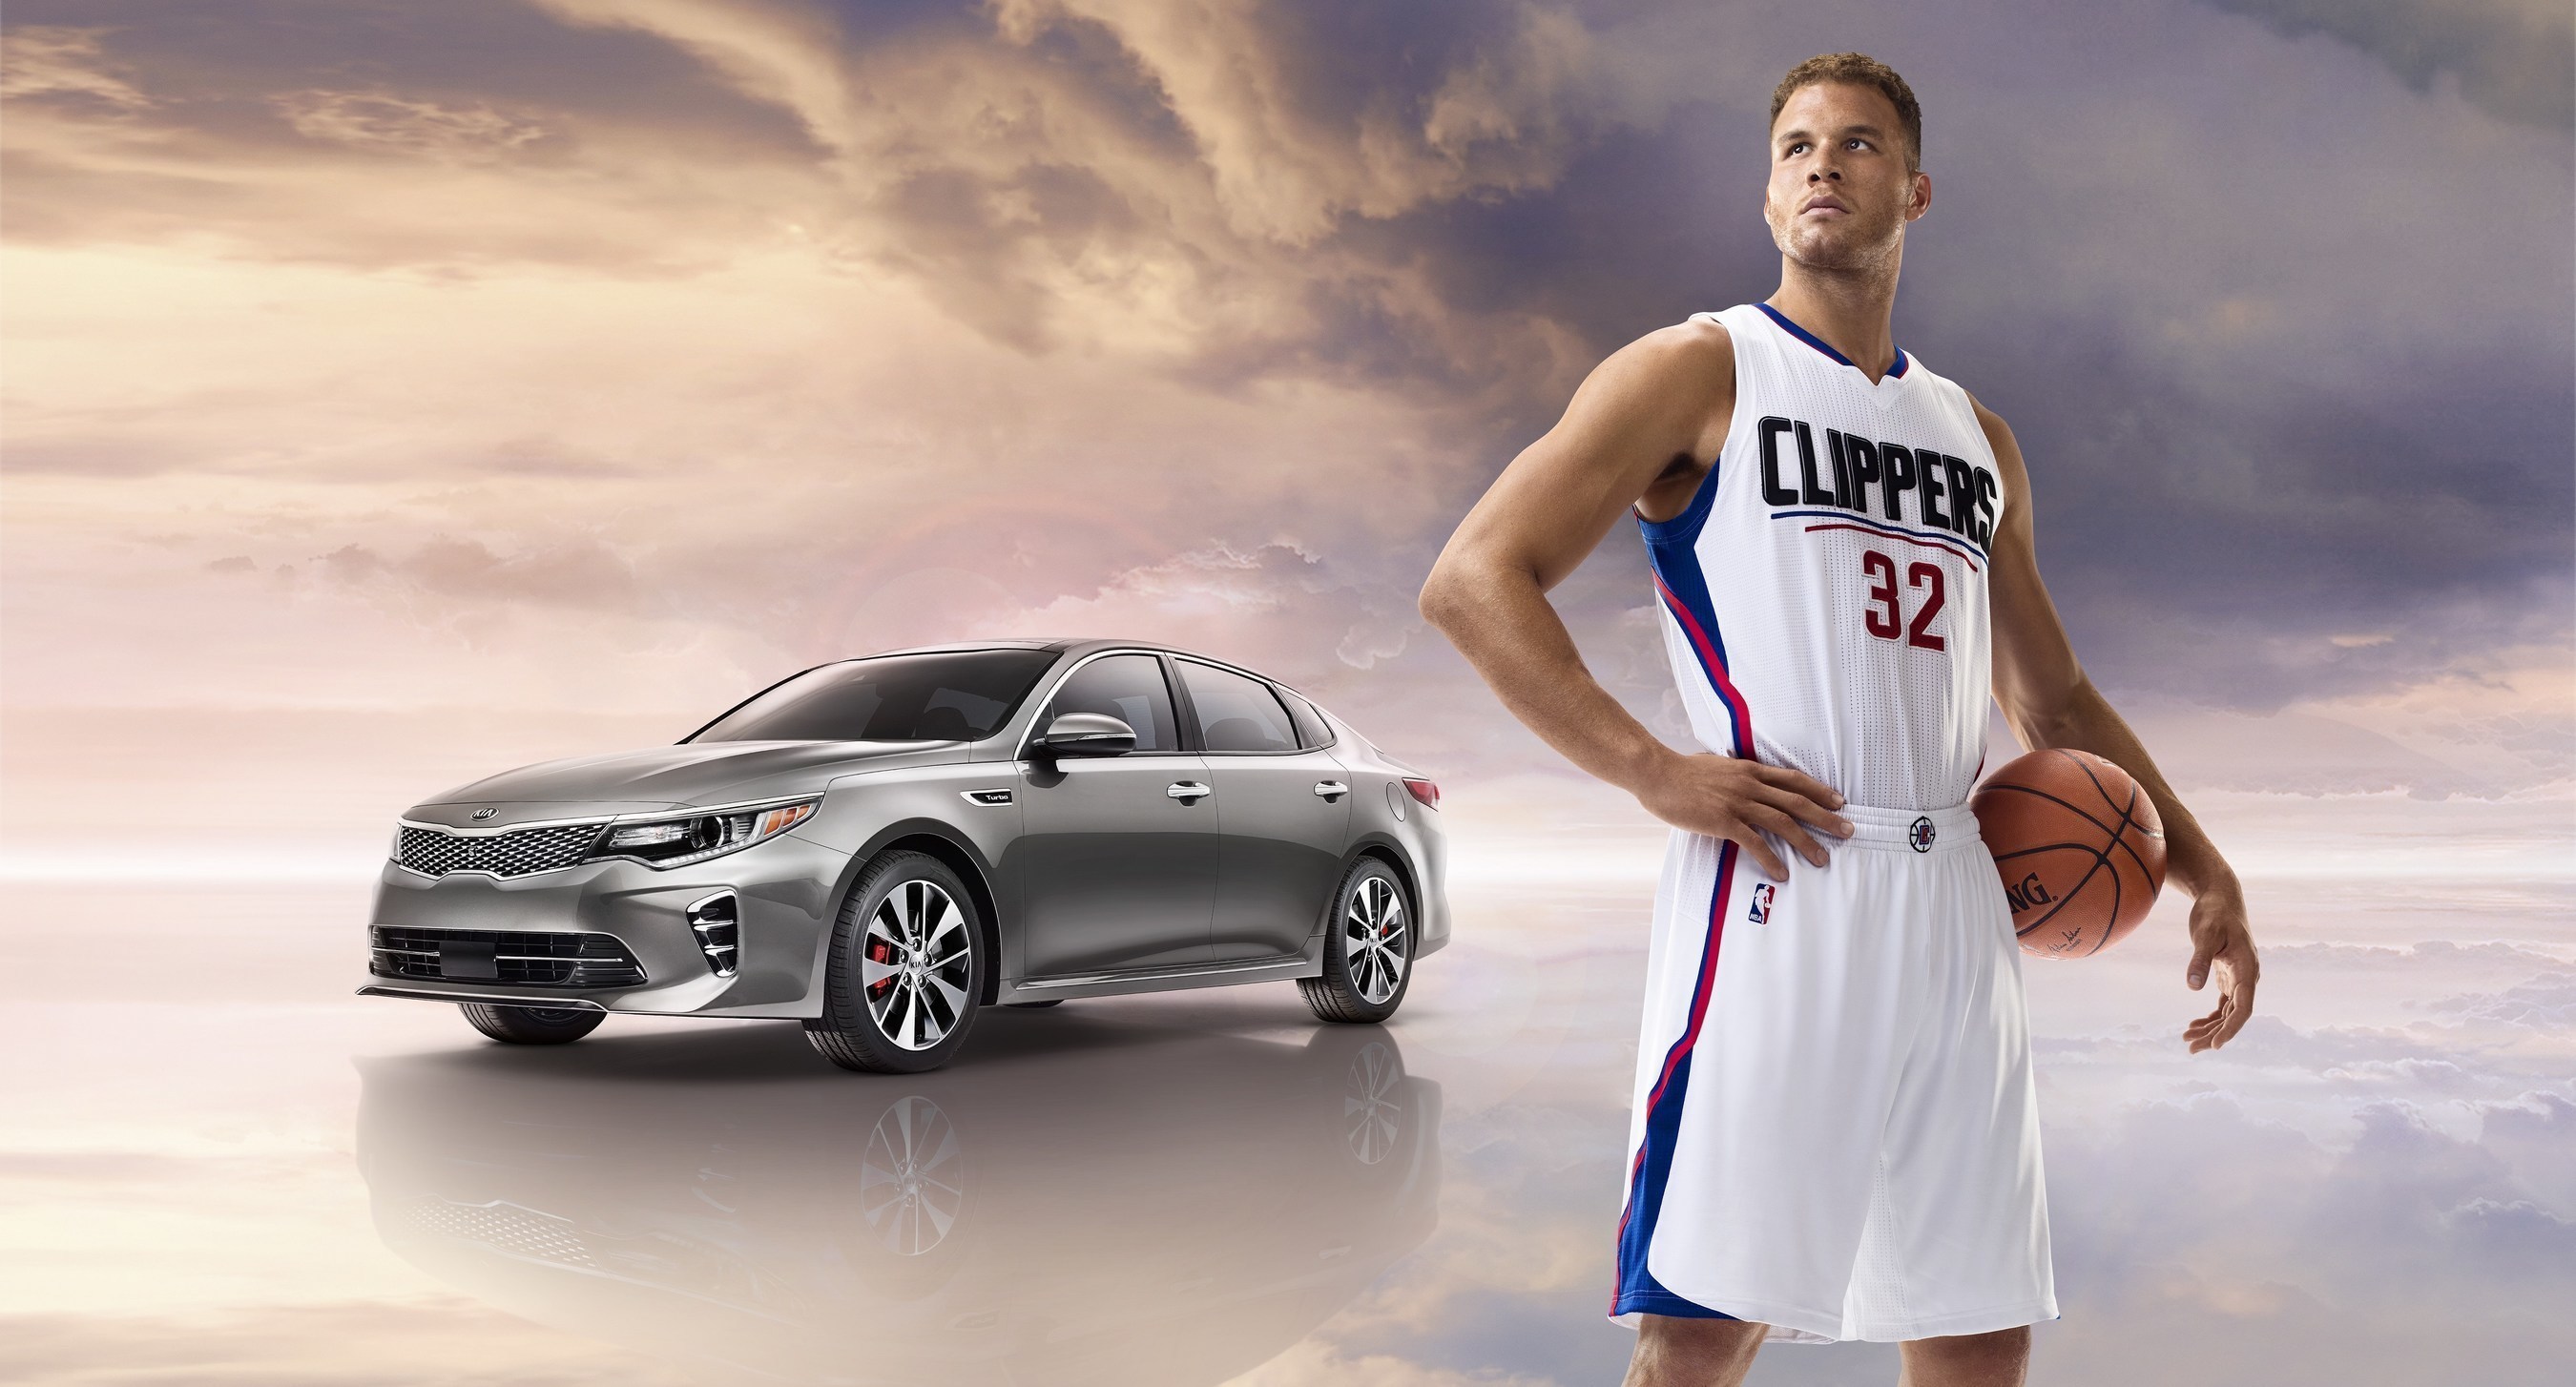 Kia Motors launches "Next Level" Campaign for 2016 Optima featuring NBA All-star Blake Griffin